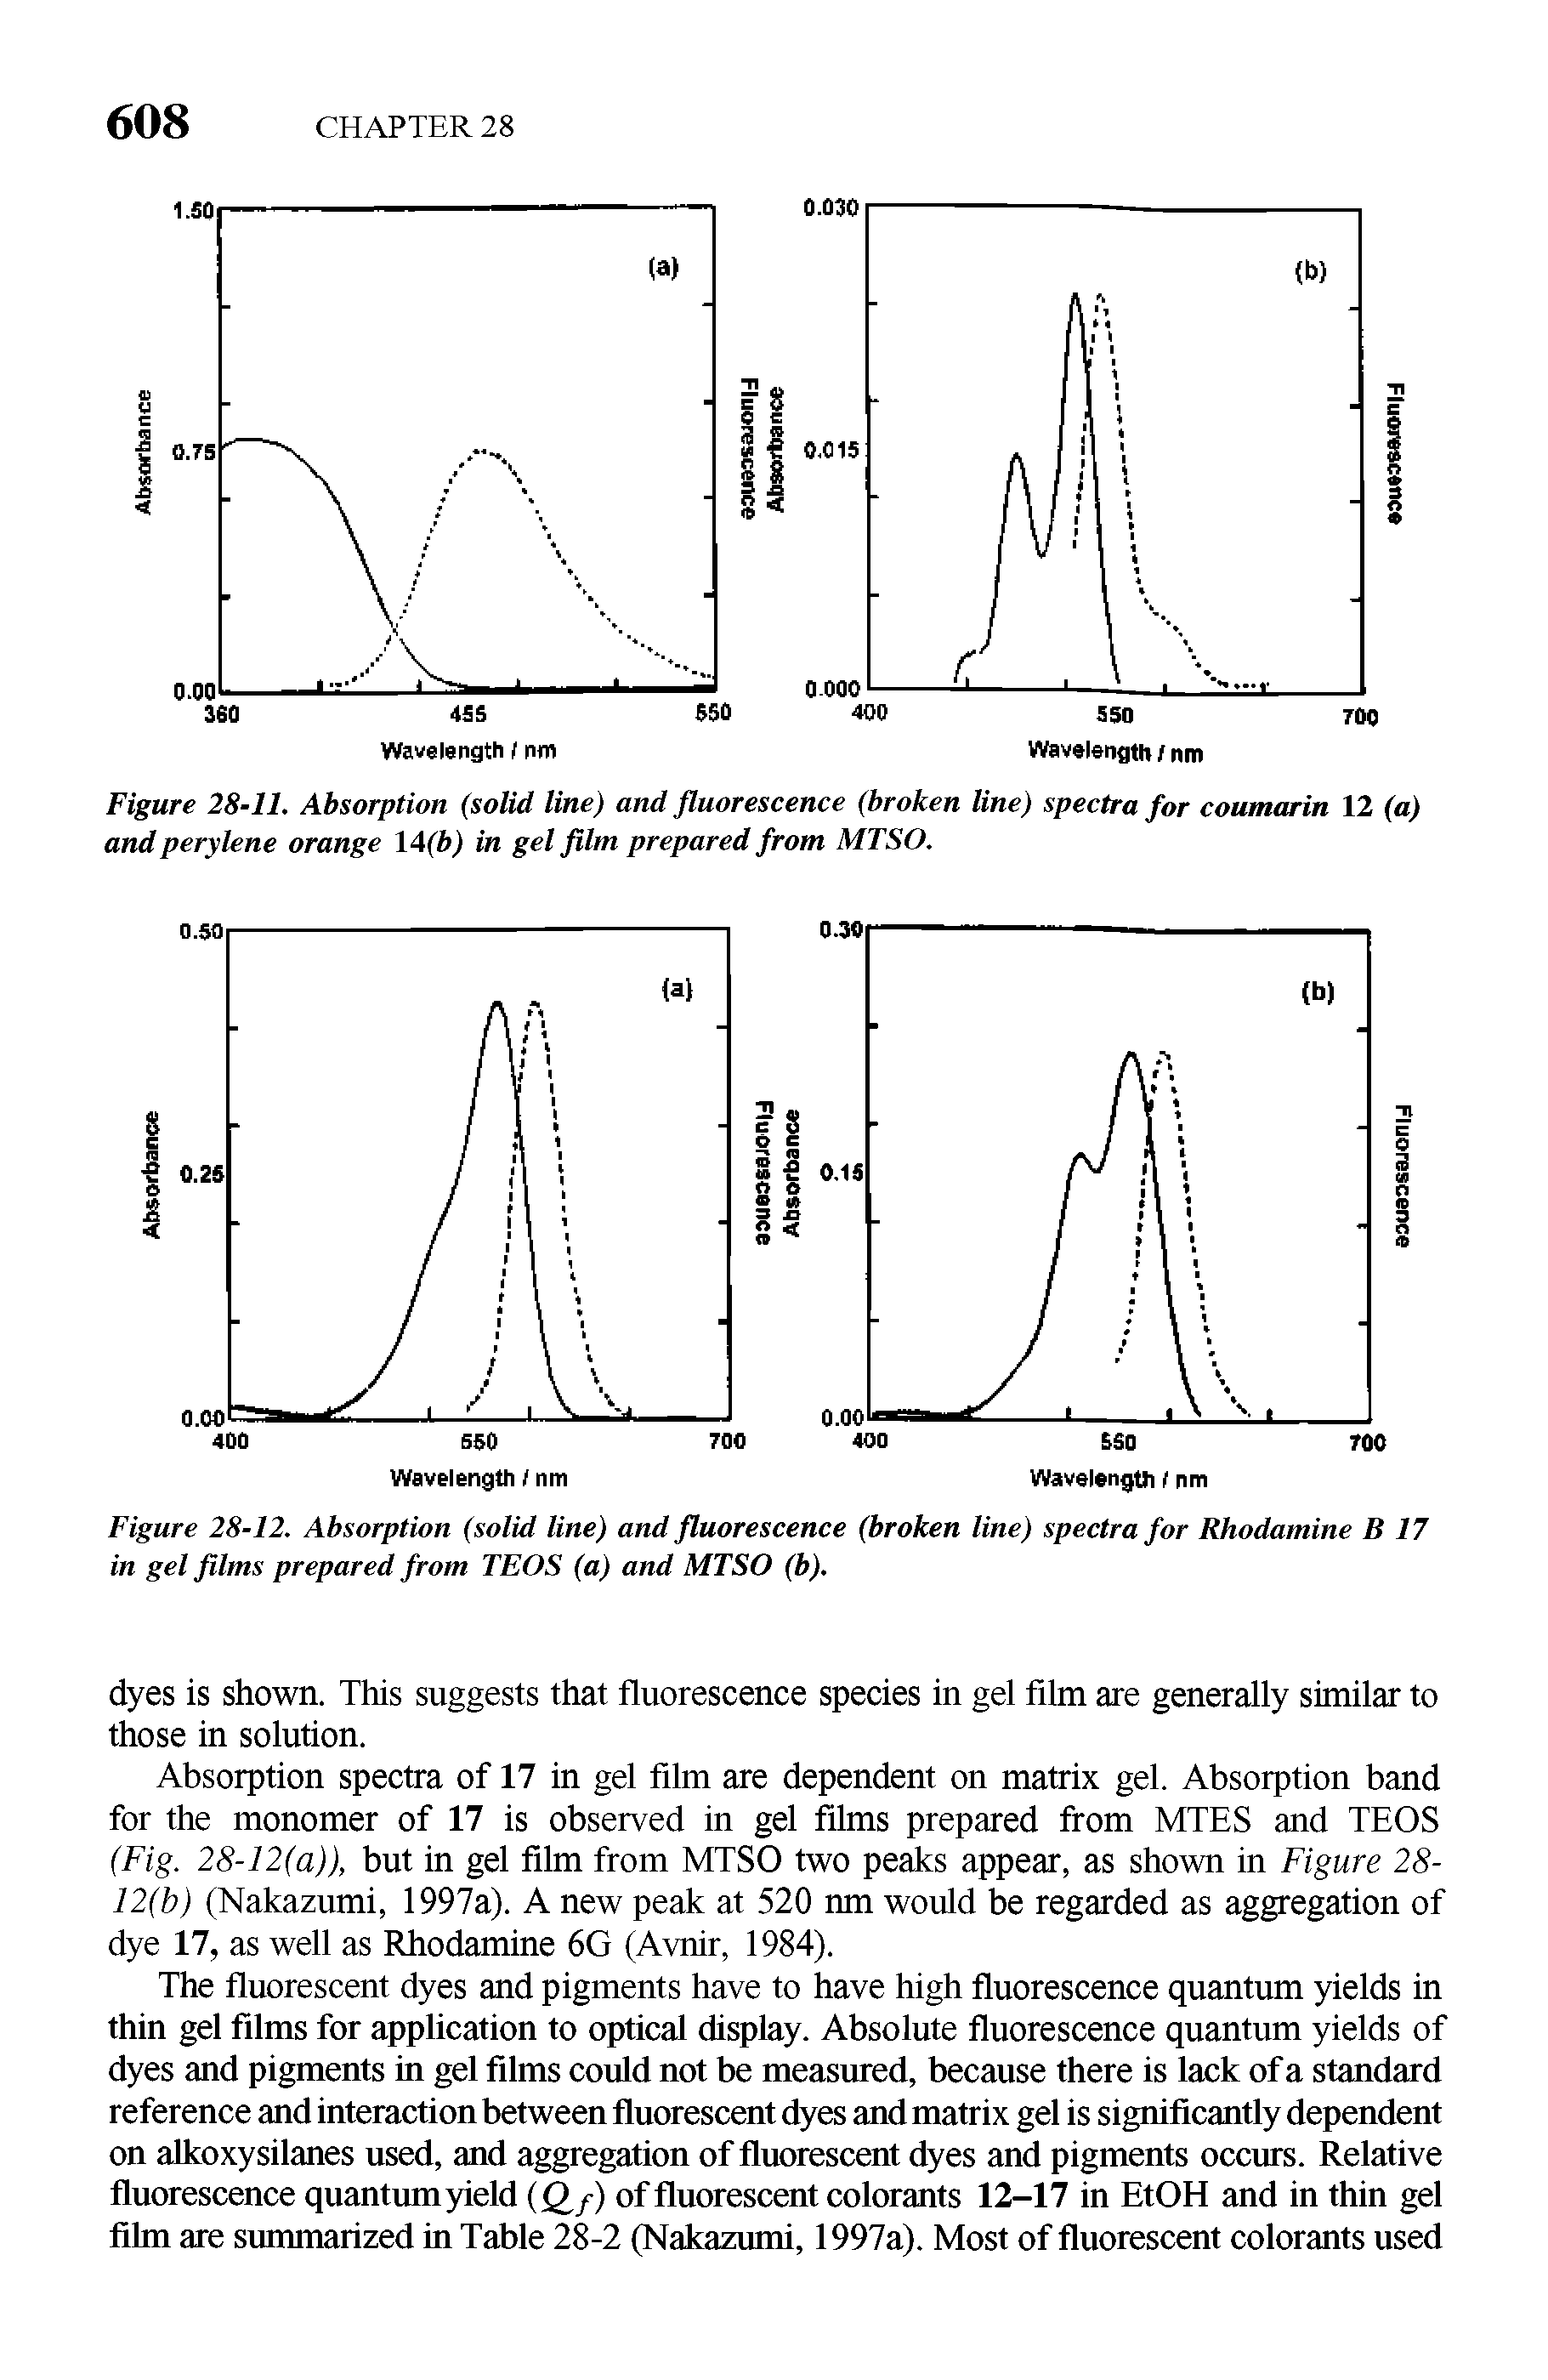 Figure 28-11. Absorption (solid line) and fluorescence (broken line) spectra for coumarin 12 (a) and perylene orange 14(b) in gel film prepared from MTSO.